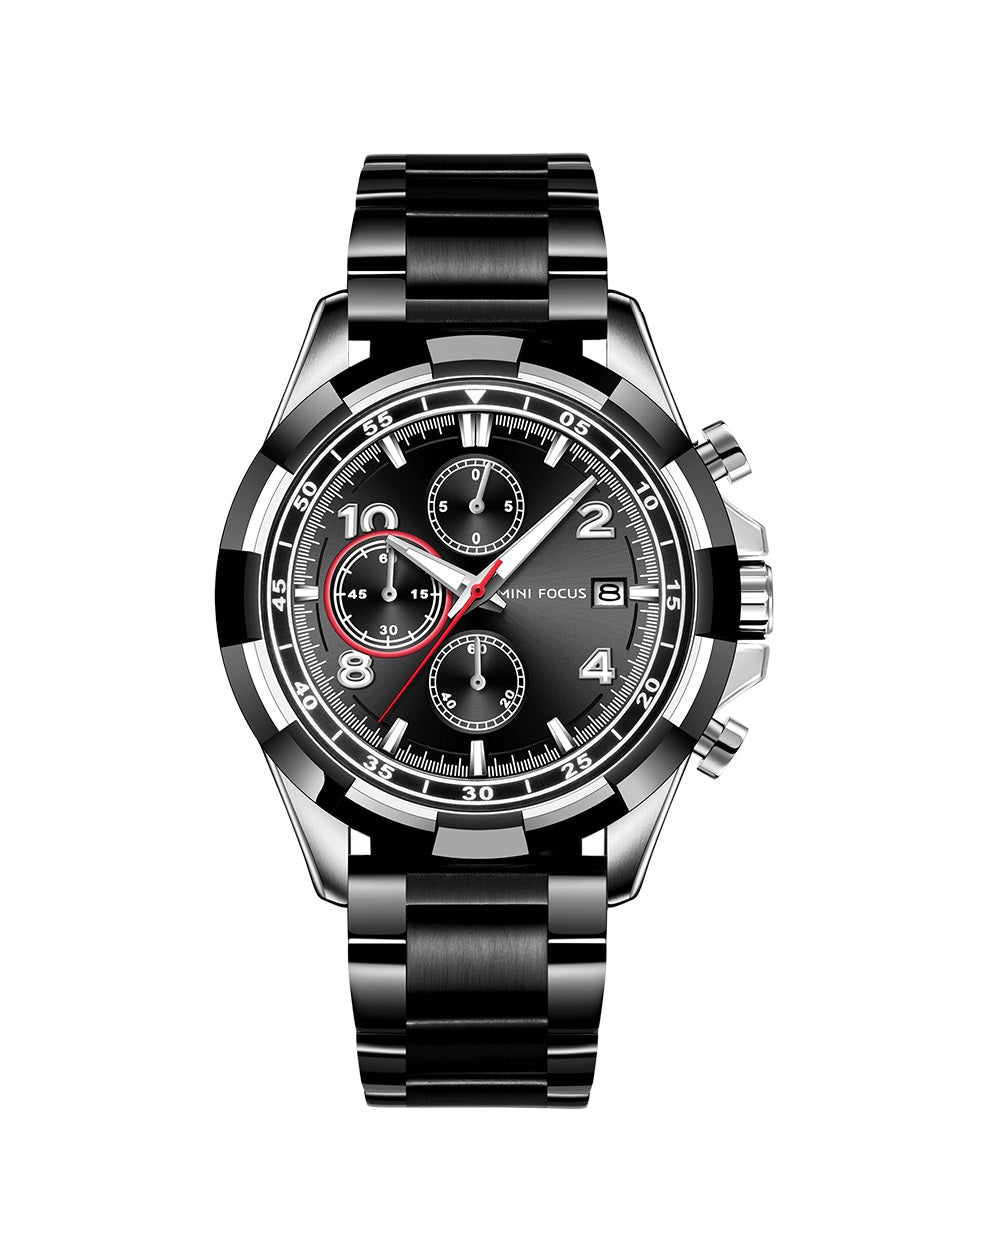 Black and Silver Luxury Watch